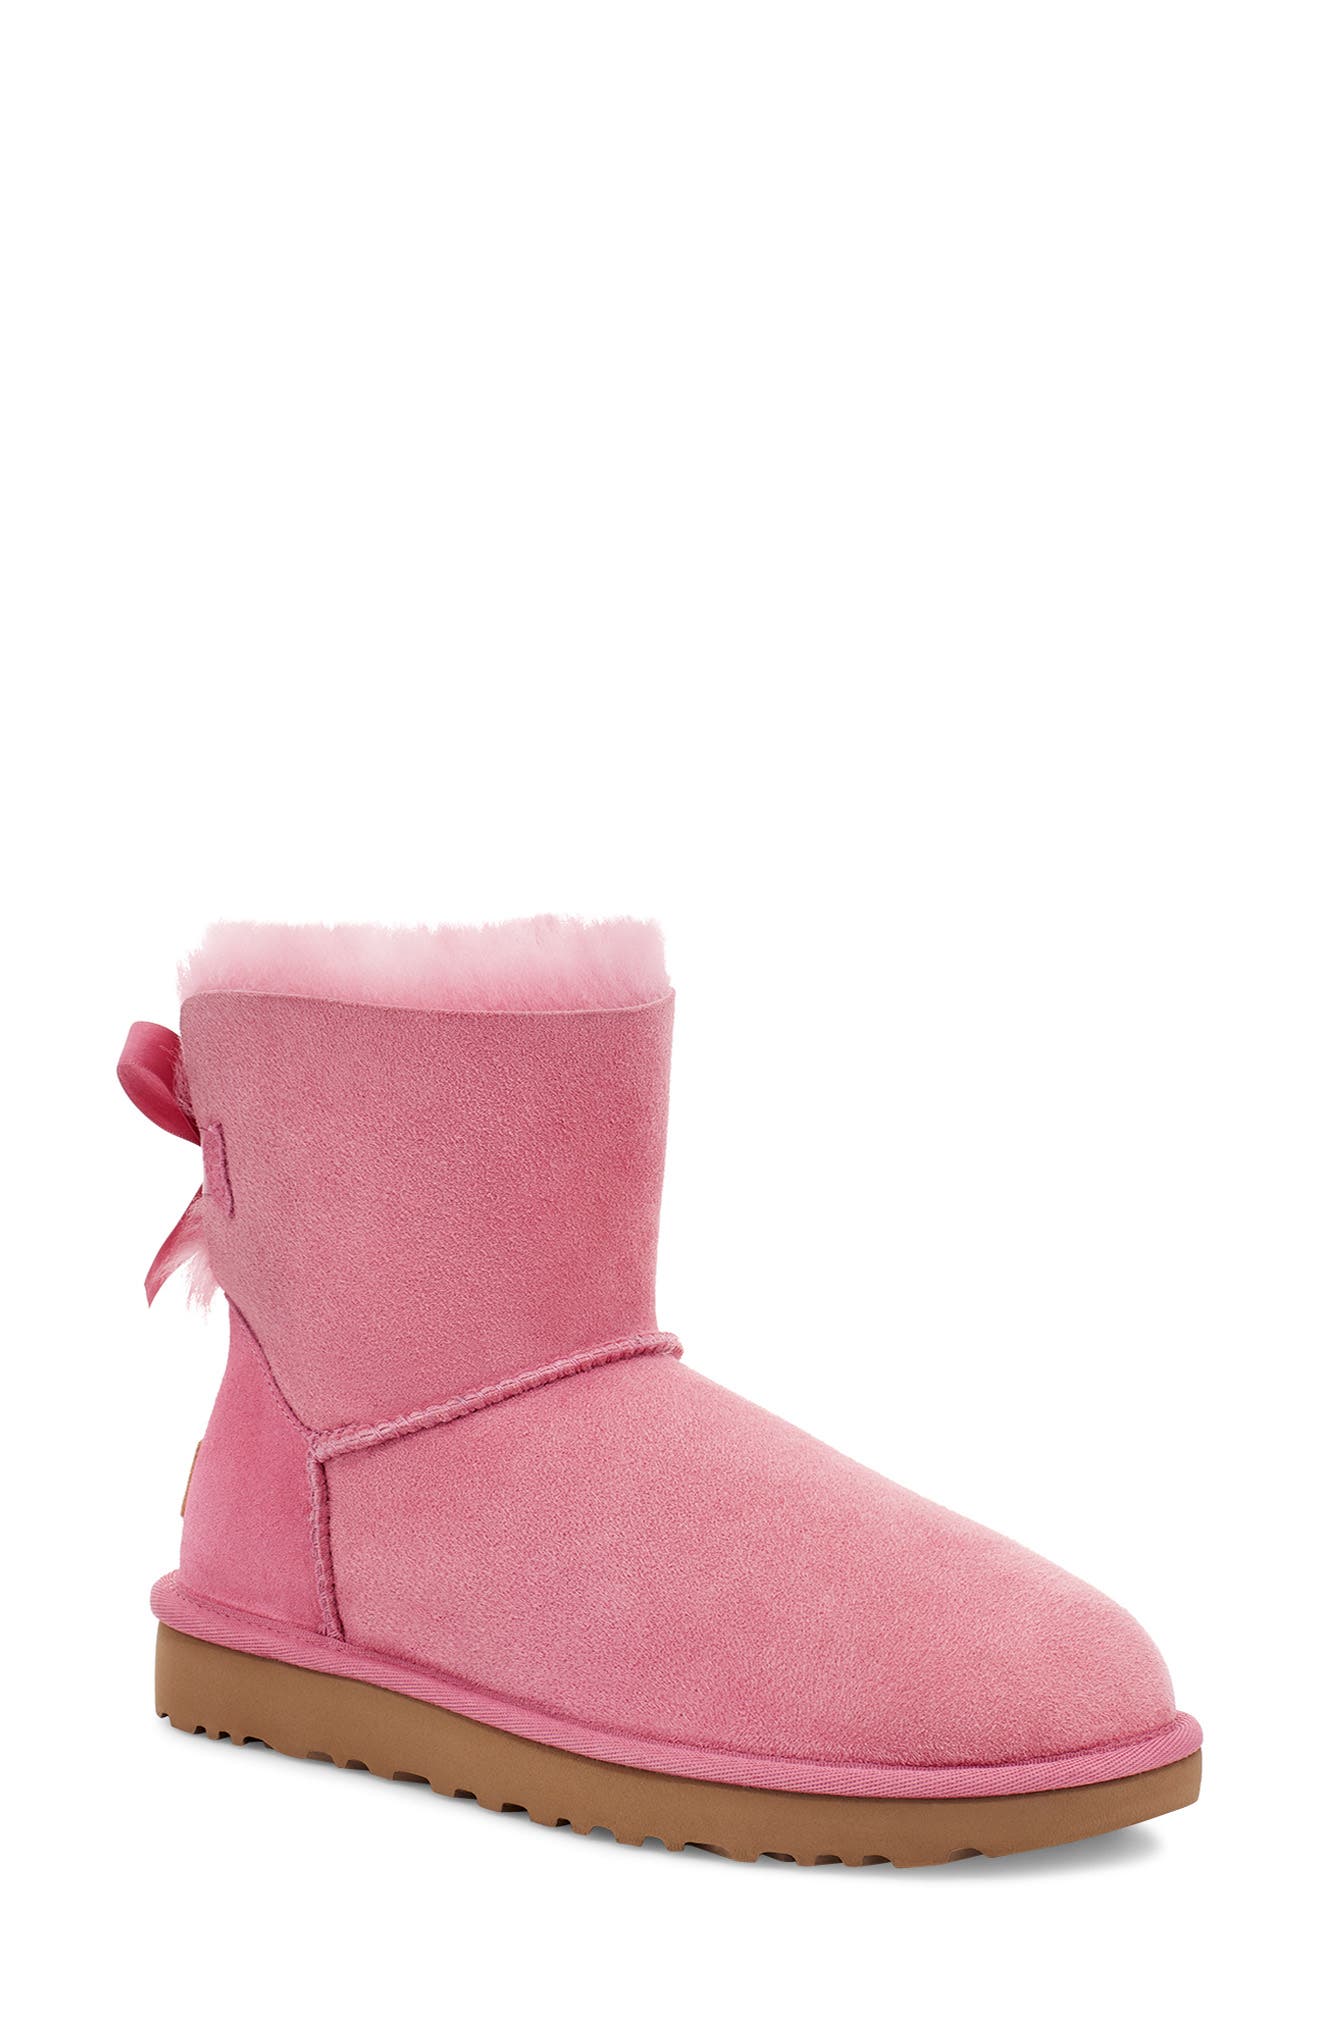 nordstrom womens winter boots